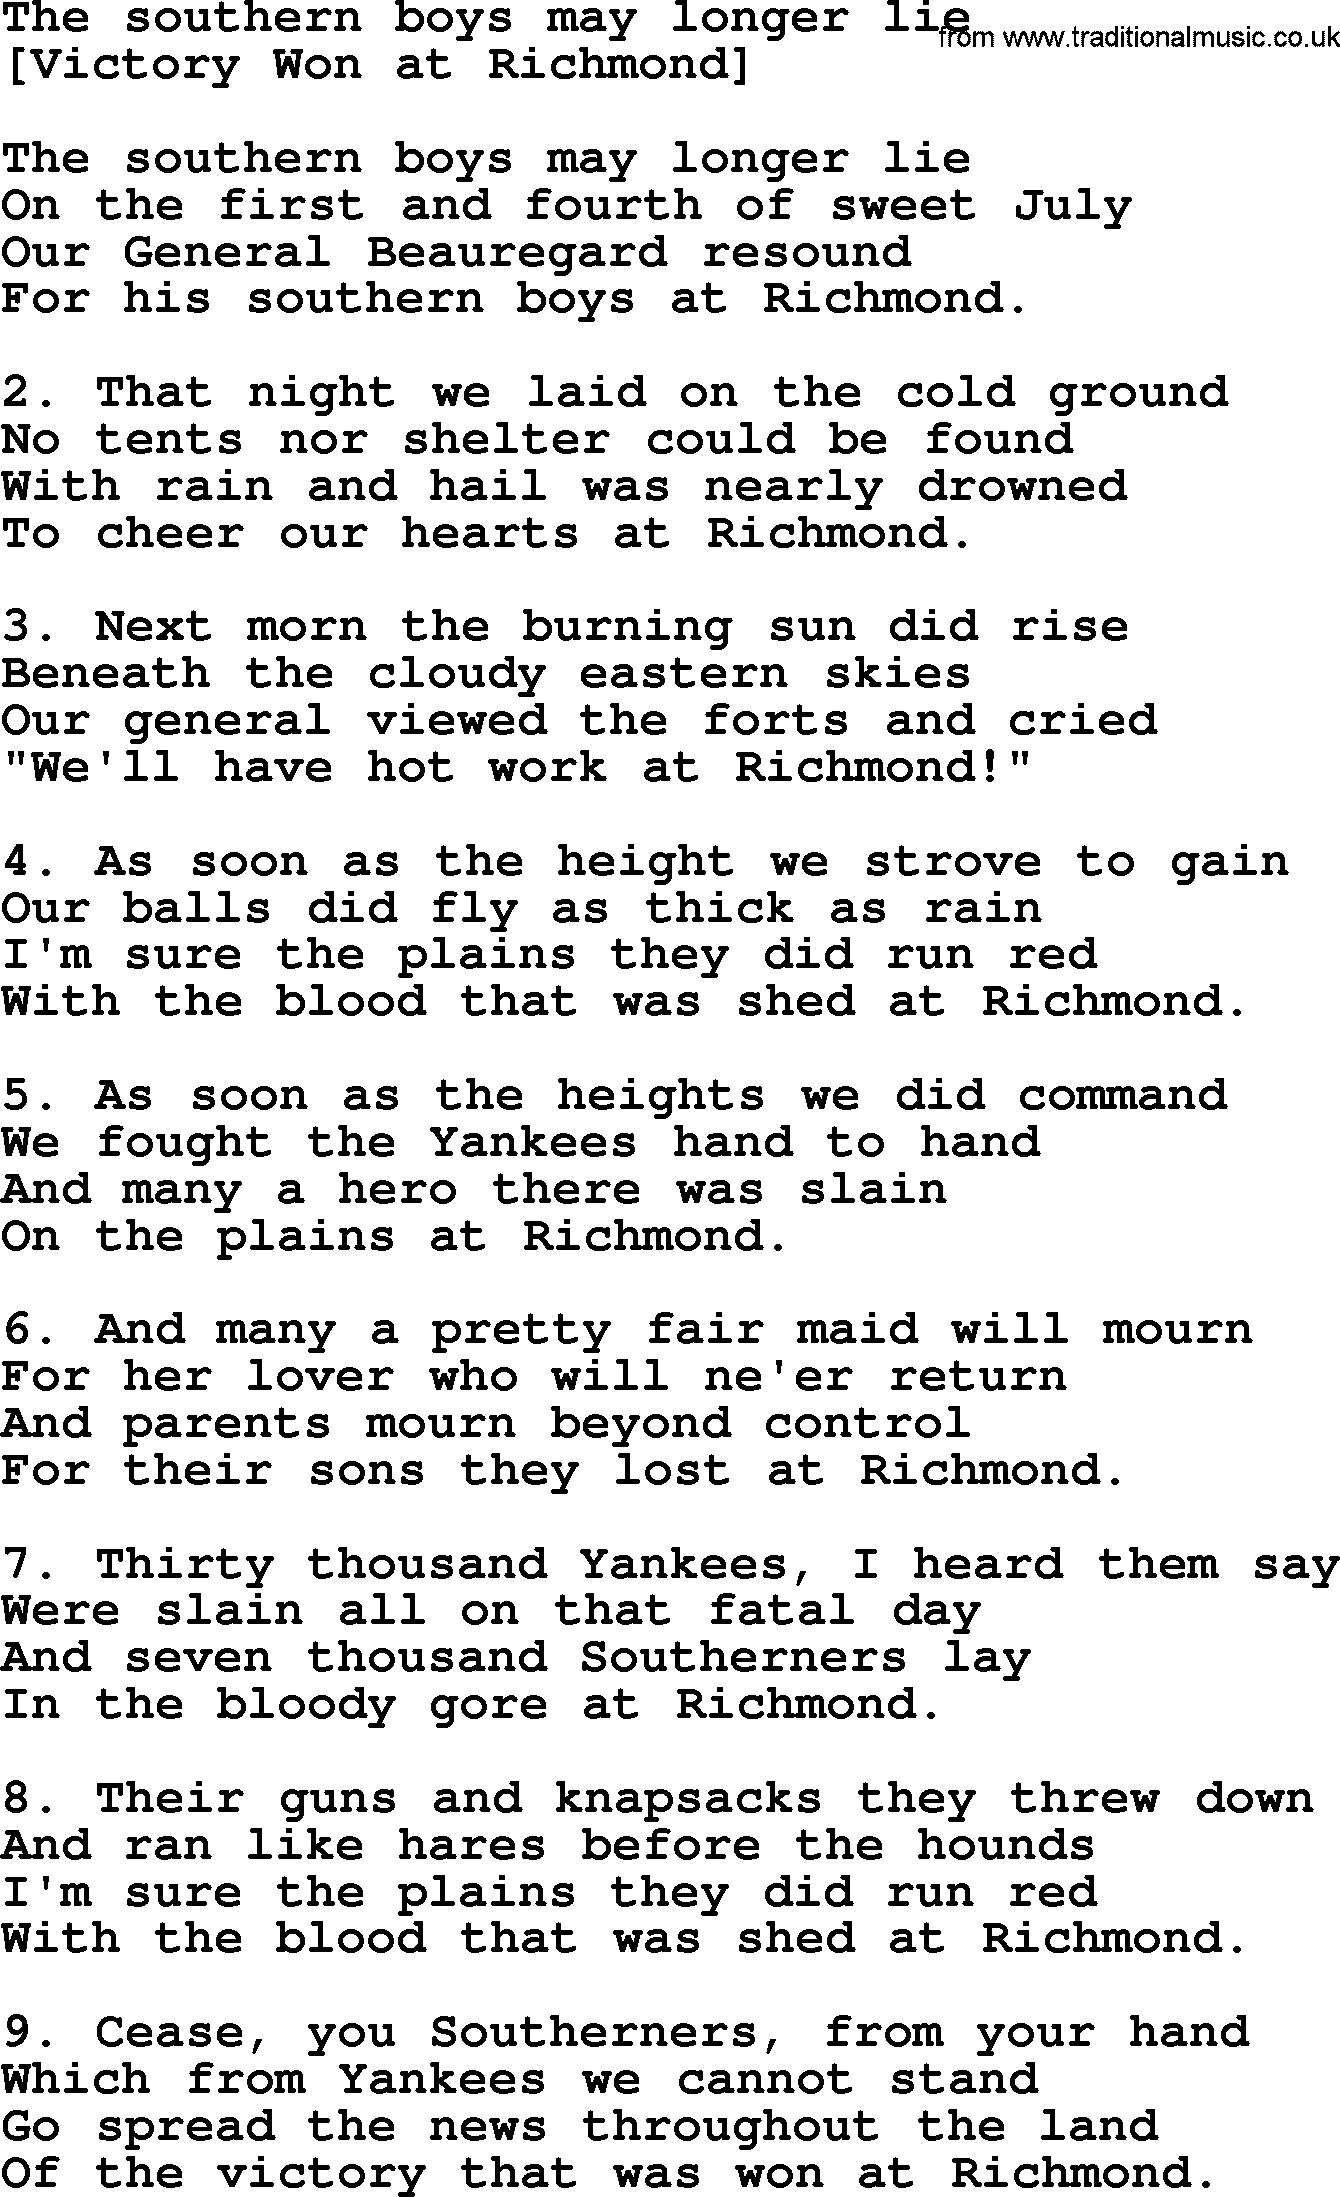 Old American Song - Lyrics for: The Southern Boys May Longer Lie, with PDF